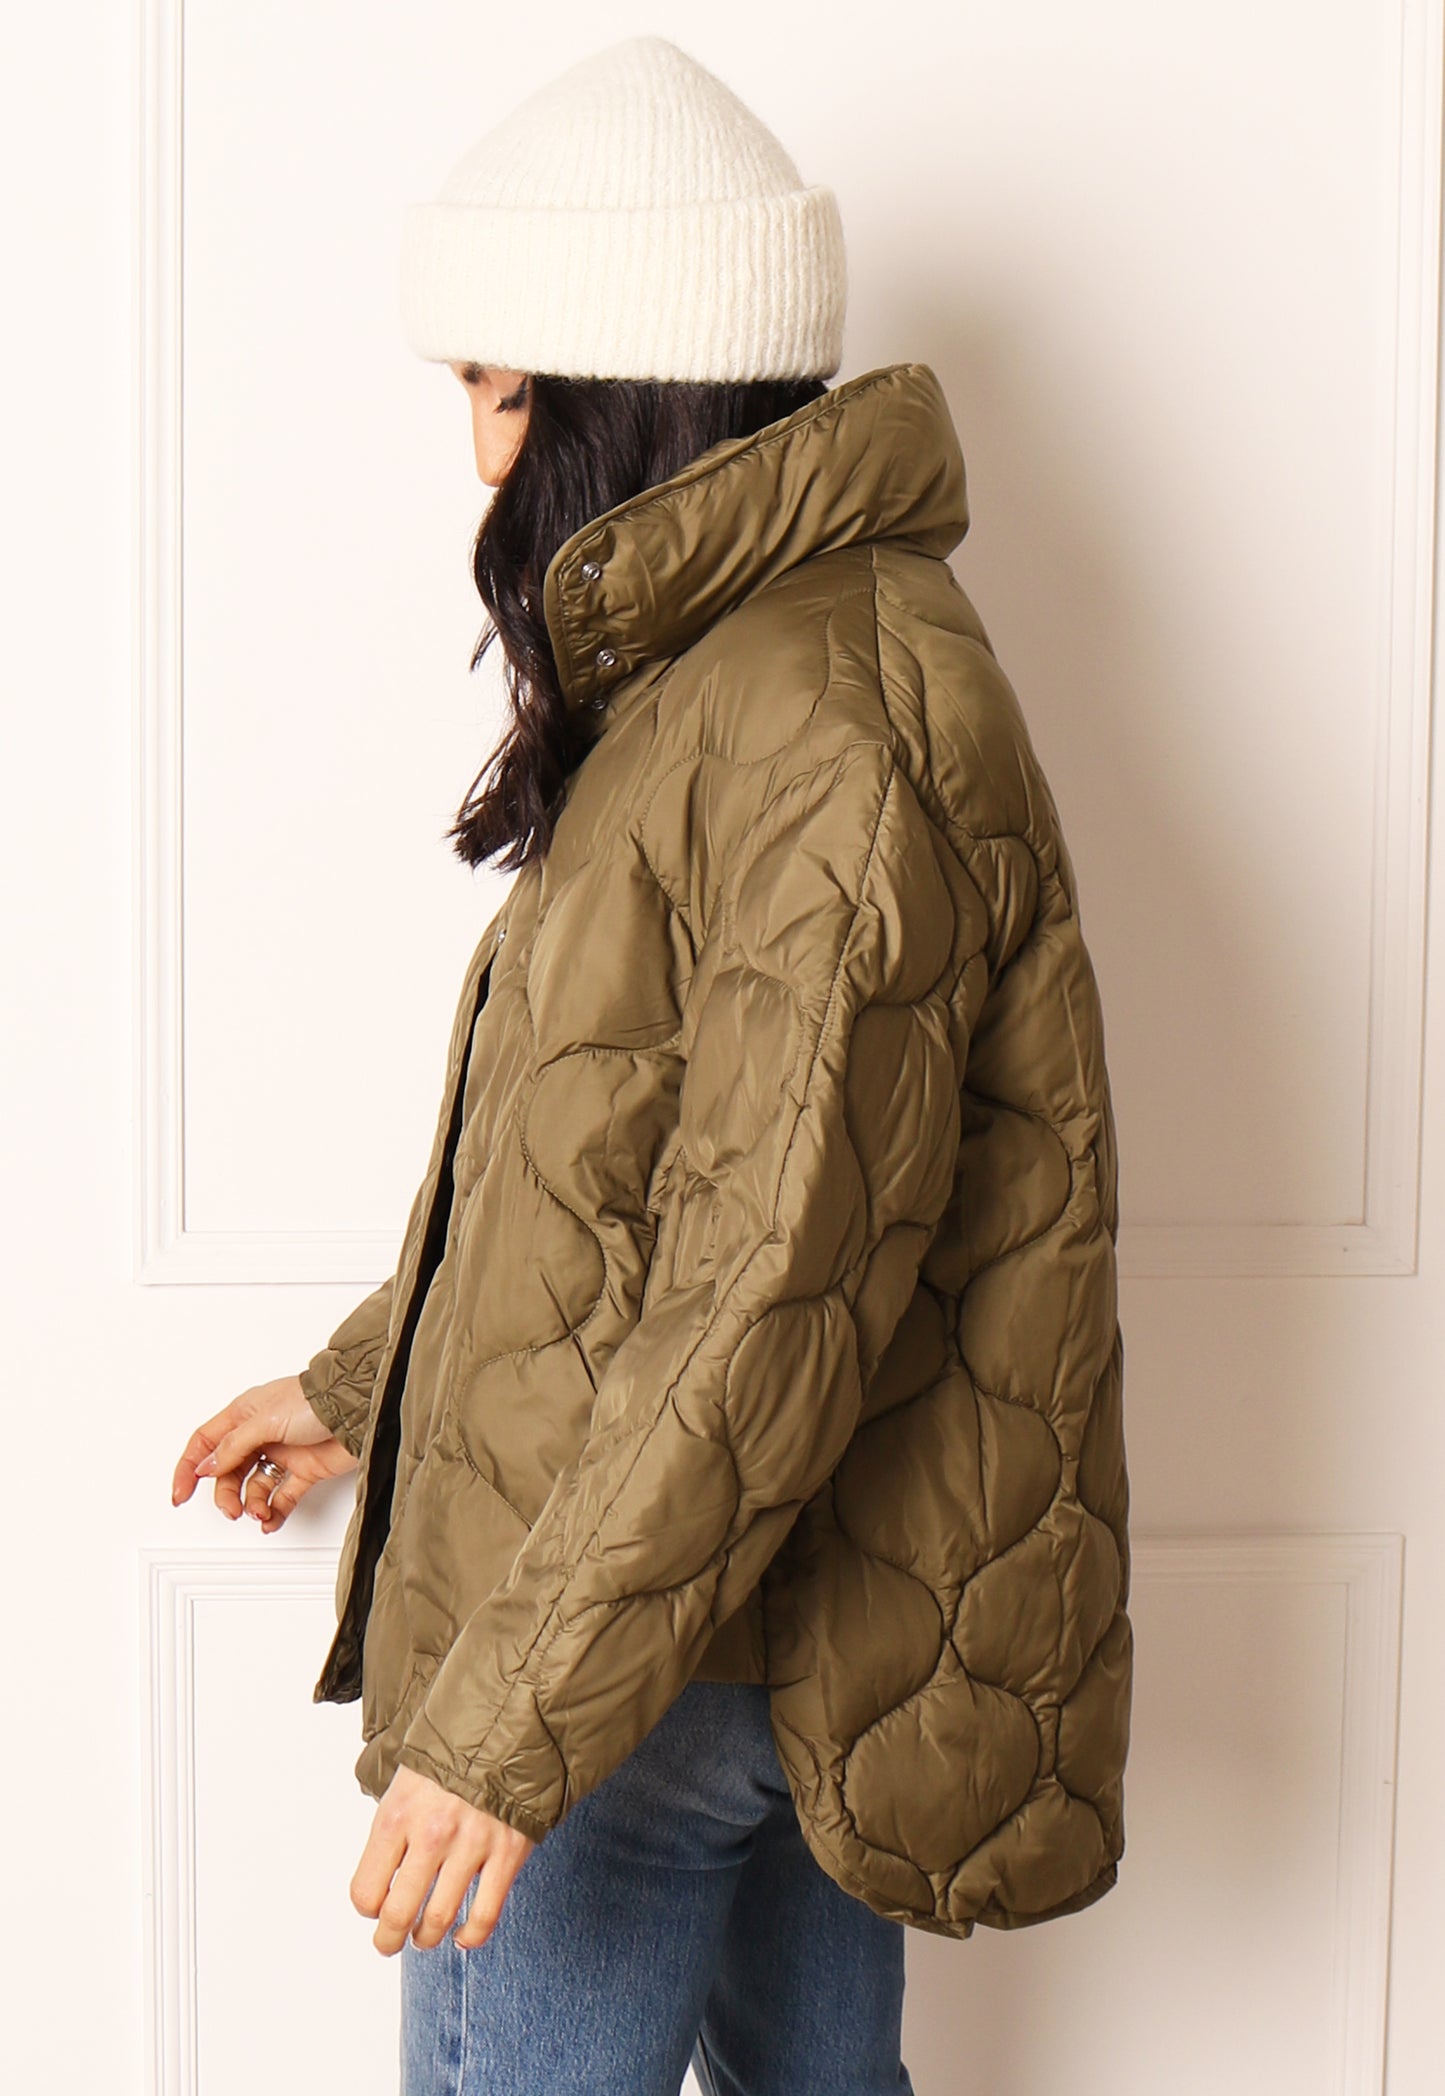 
                  
                    JJXX Nova Onion Quilted Jacket with High Neck in Soft Khaki - One Nation Clothing
                  
                